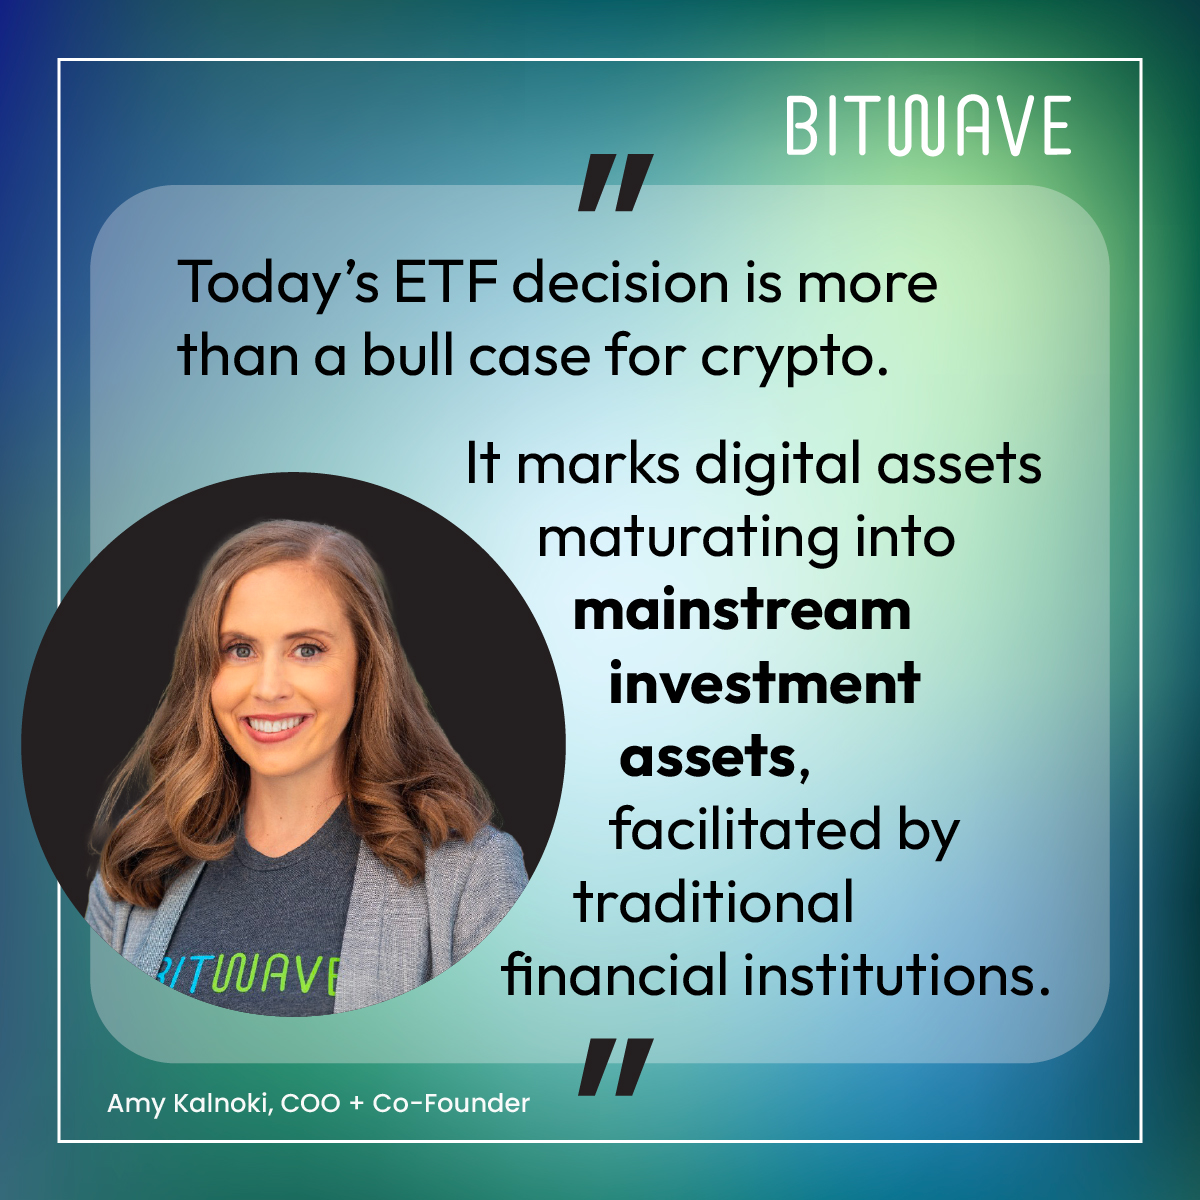 BitwavePlatform: History in the Making! SEC Approves Spot Bitcoin ETF! 📣🎉

Today’s decision makes digital assets more accessible to everyone

From institutions to everyday investors – the doors are opening for faster, safer, and easier crypto adoptio…